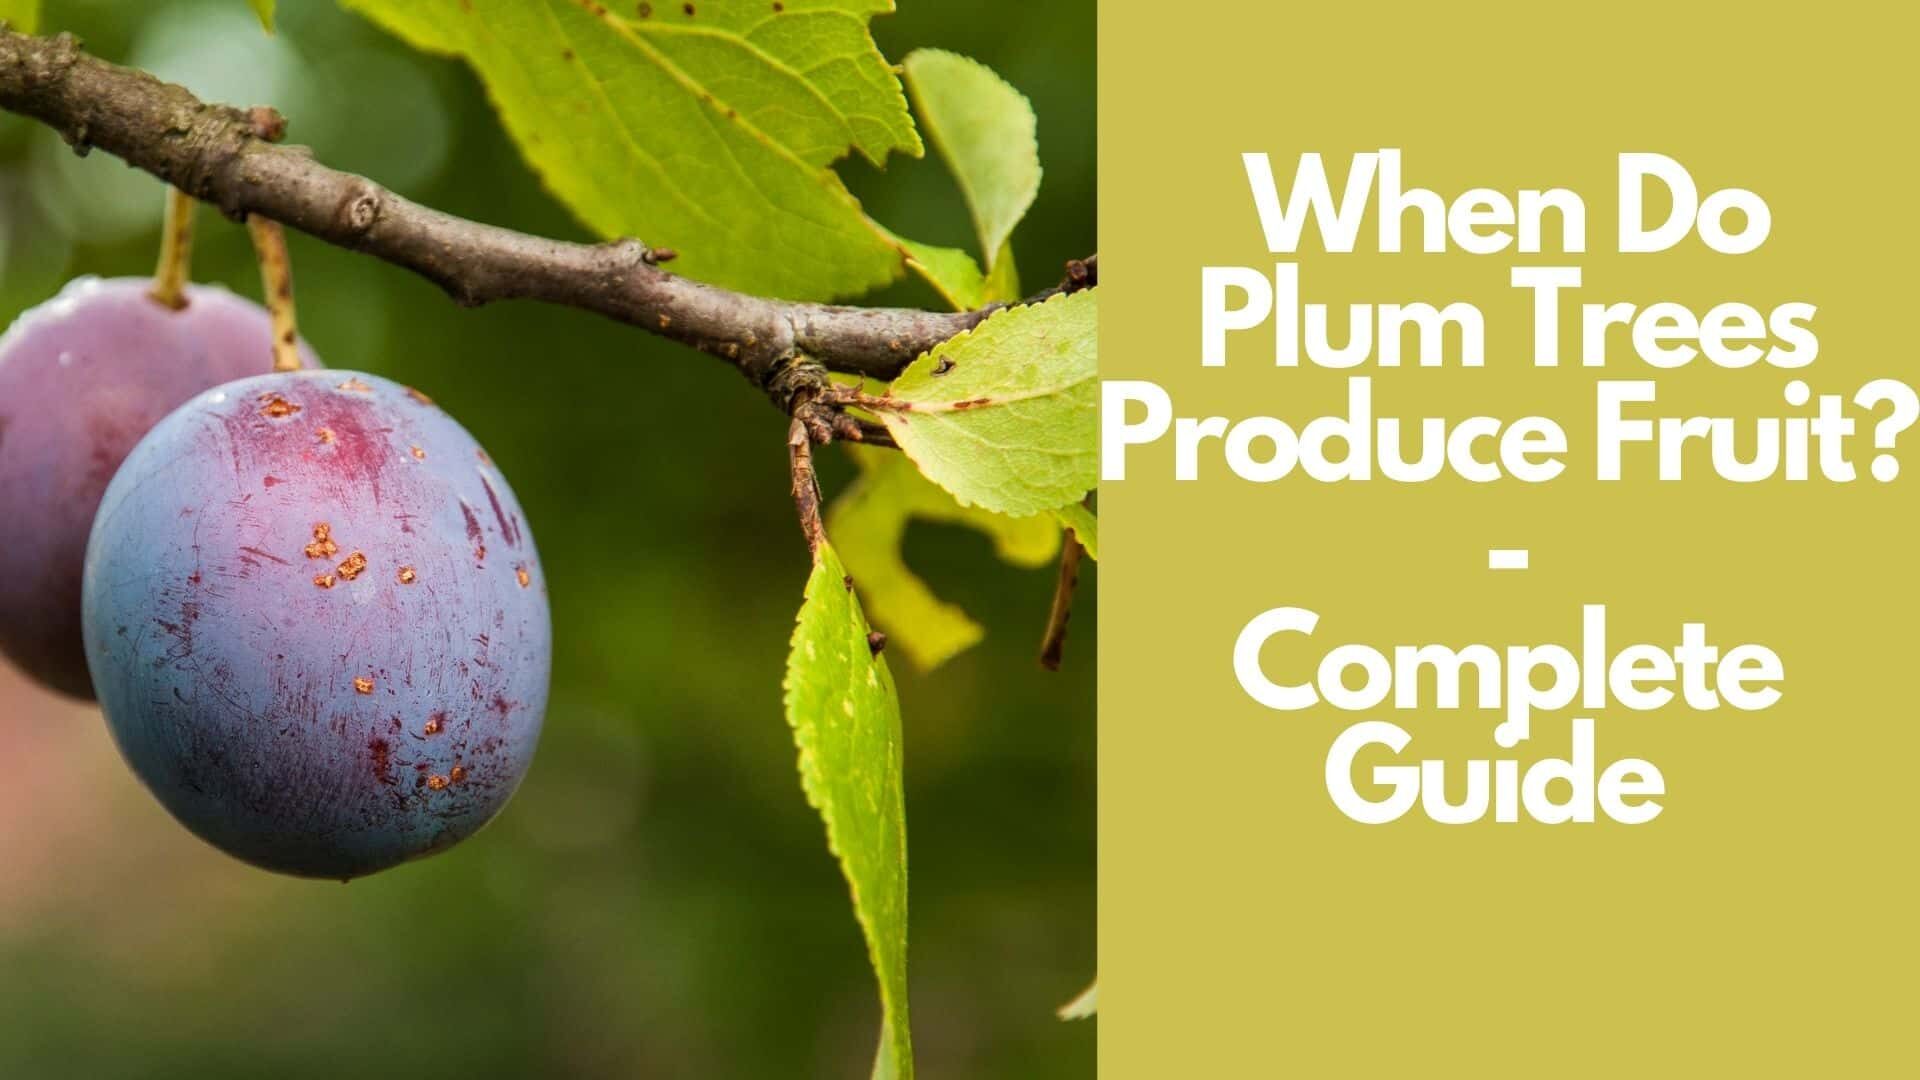 When Do Plum Trees Produce Fruit? | Complete Guide 